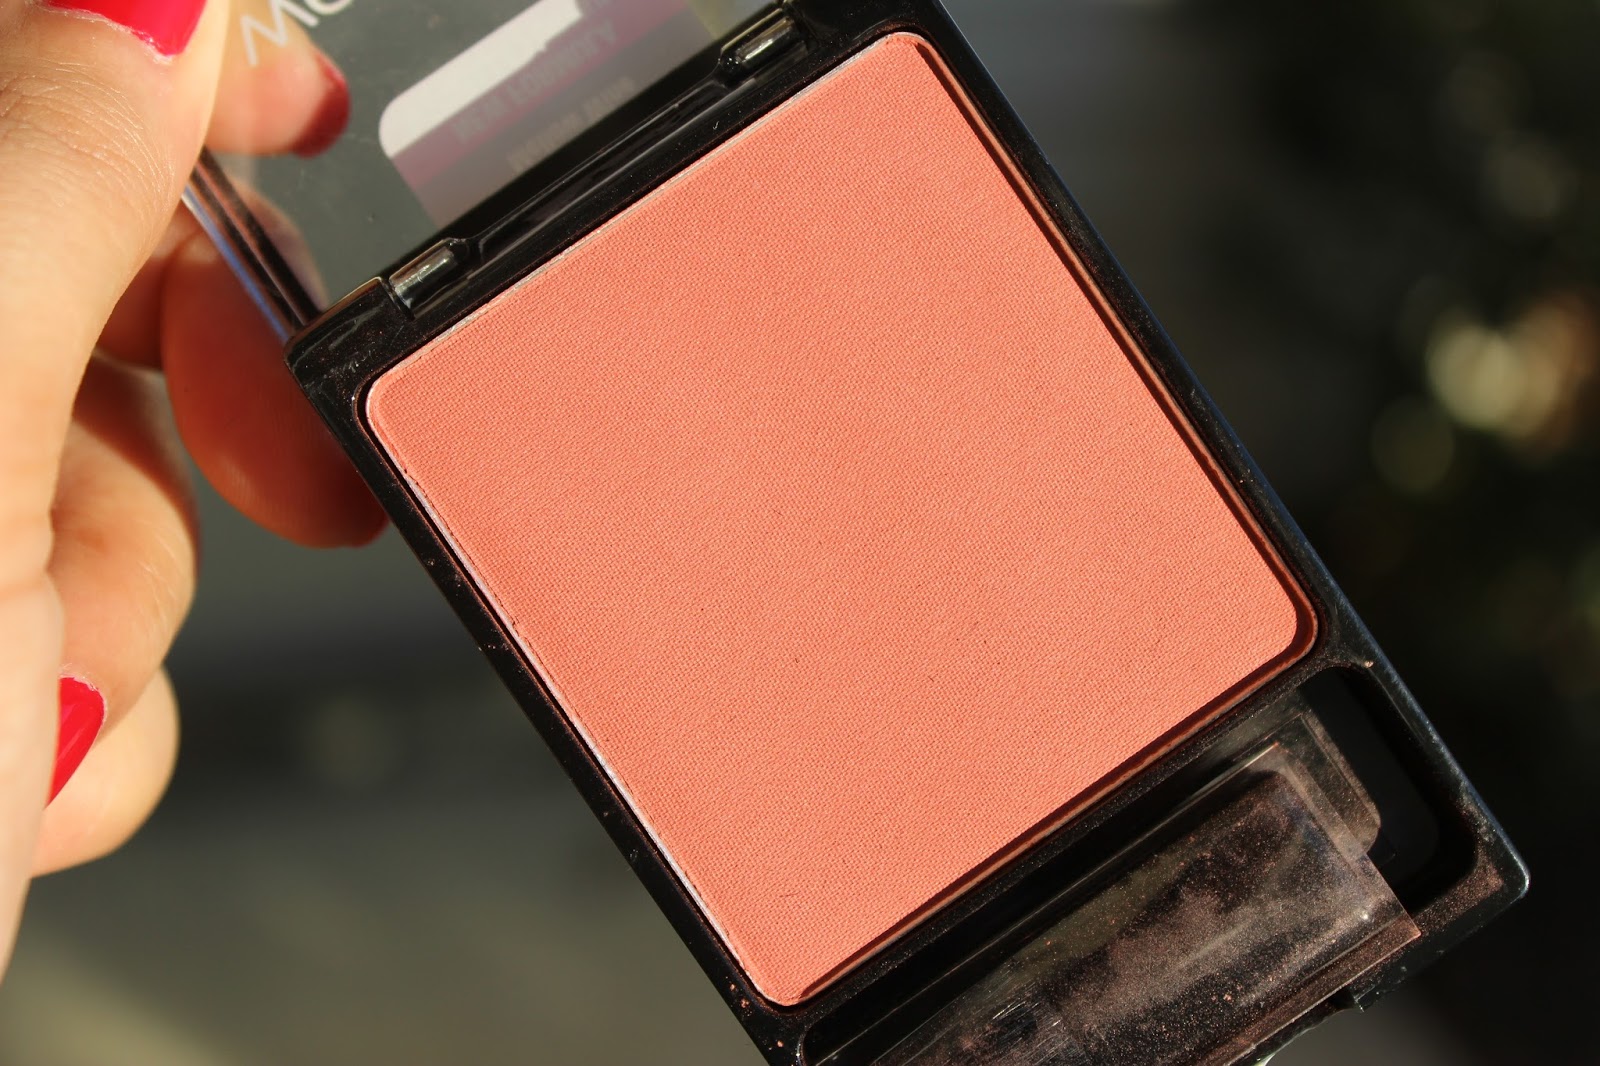 NEW Wet N Wild Coloricon Blush in Mellow Wine Review & Swatches.